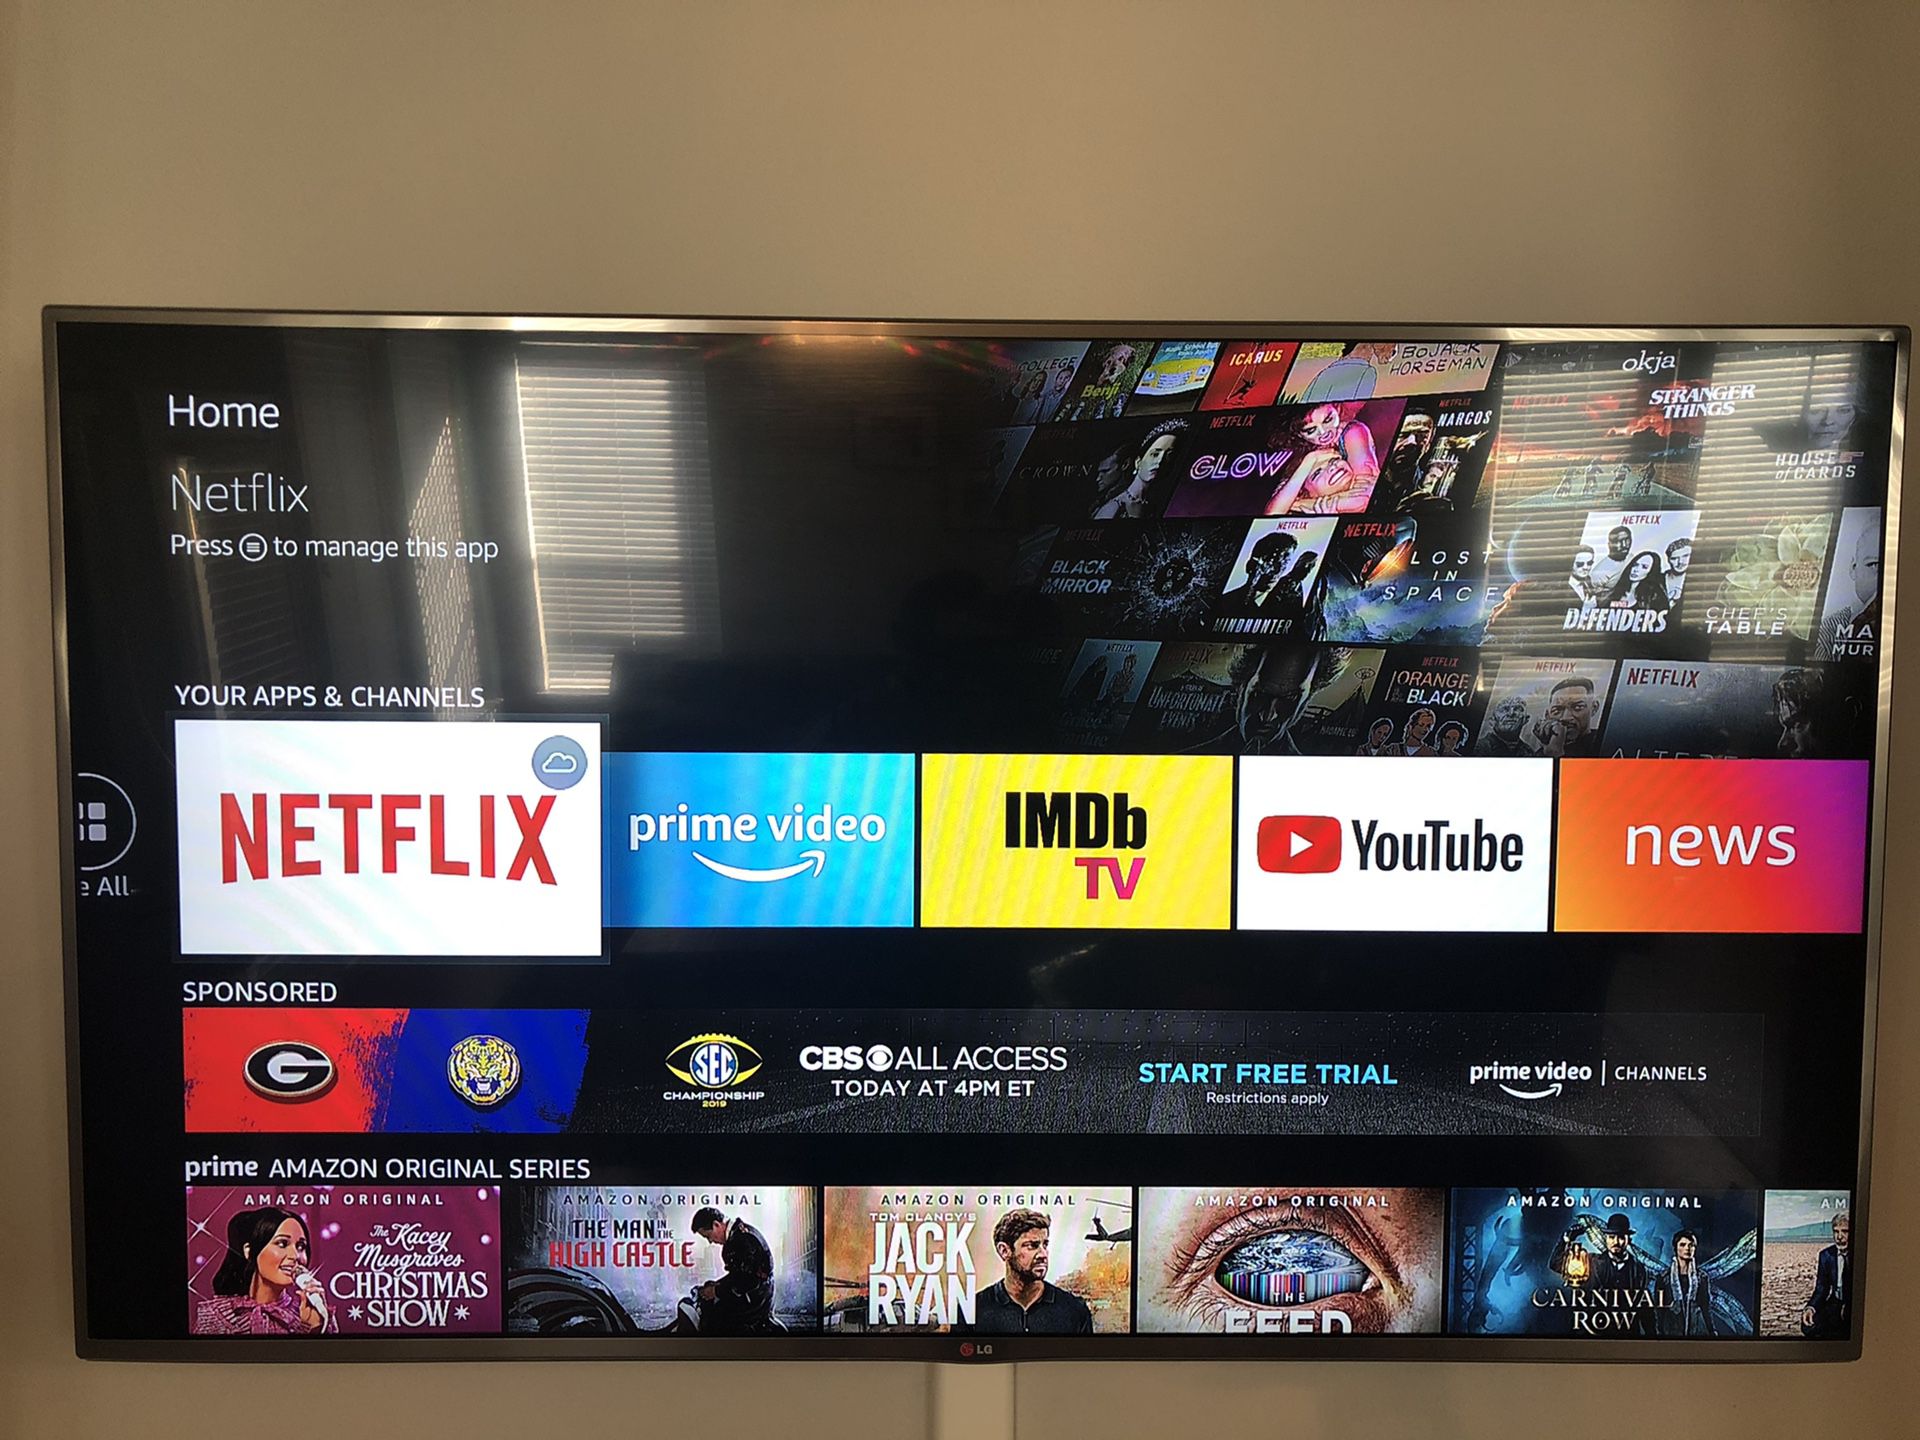 Used LG 60 inch Smart TV 1080p with wall mount